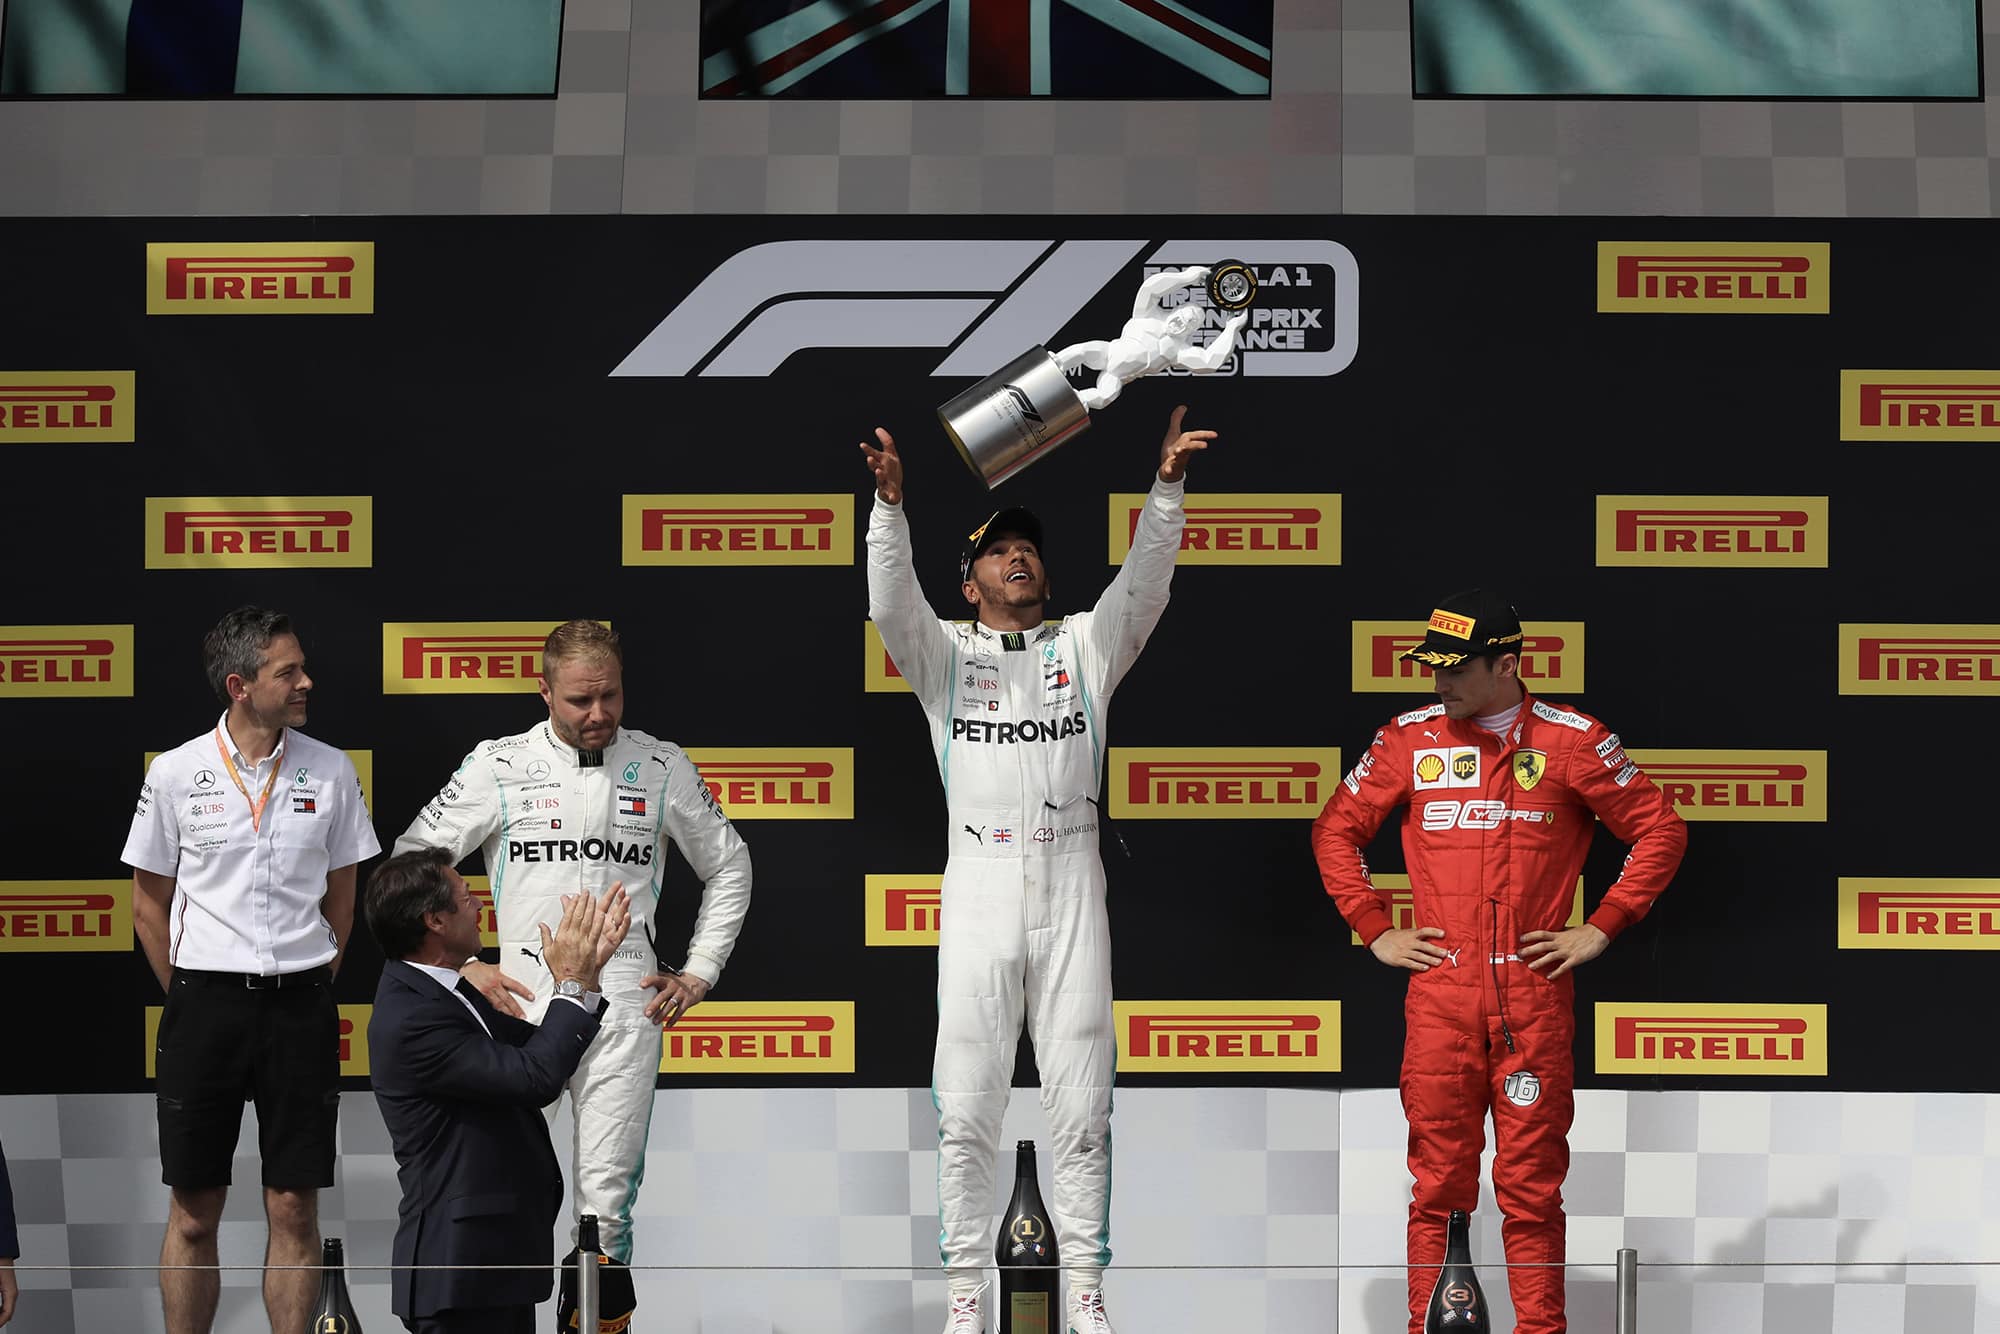 LEwis Hamilton celebrates victory on the podium after the 2019 French Grand prix